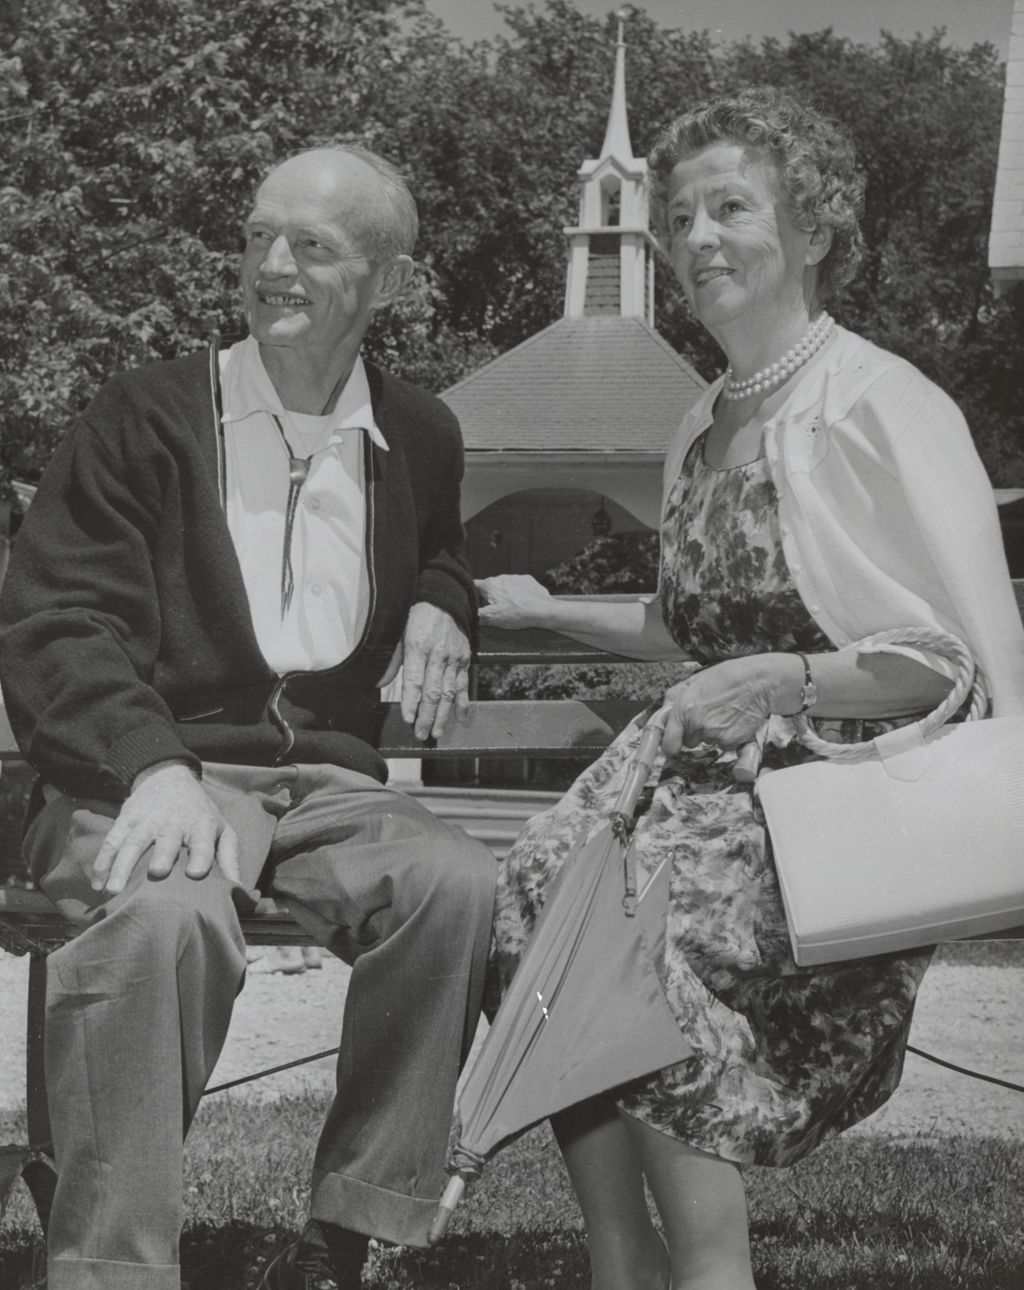 Robert Hicks, former co-director of Bowen Country Club, and Helen Bowen Blair sitting on a bench on the grass at Bowen Country Club 50th Anniversary celebration